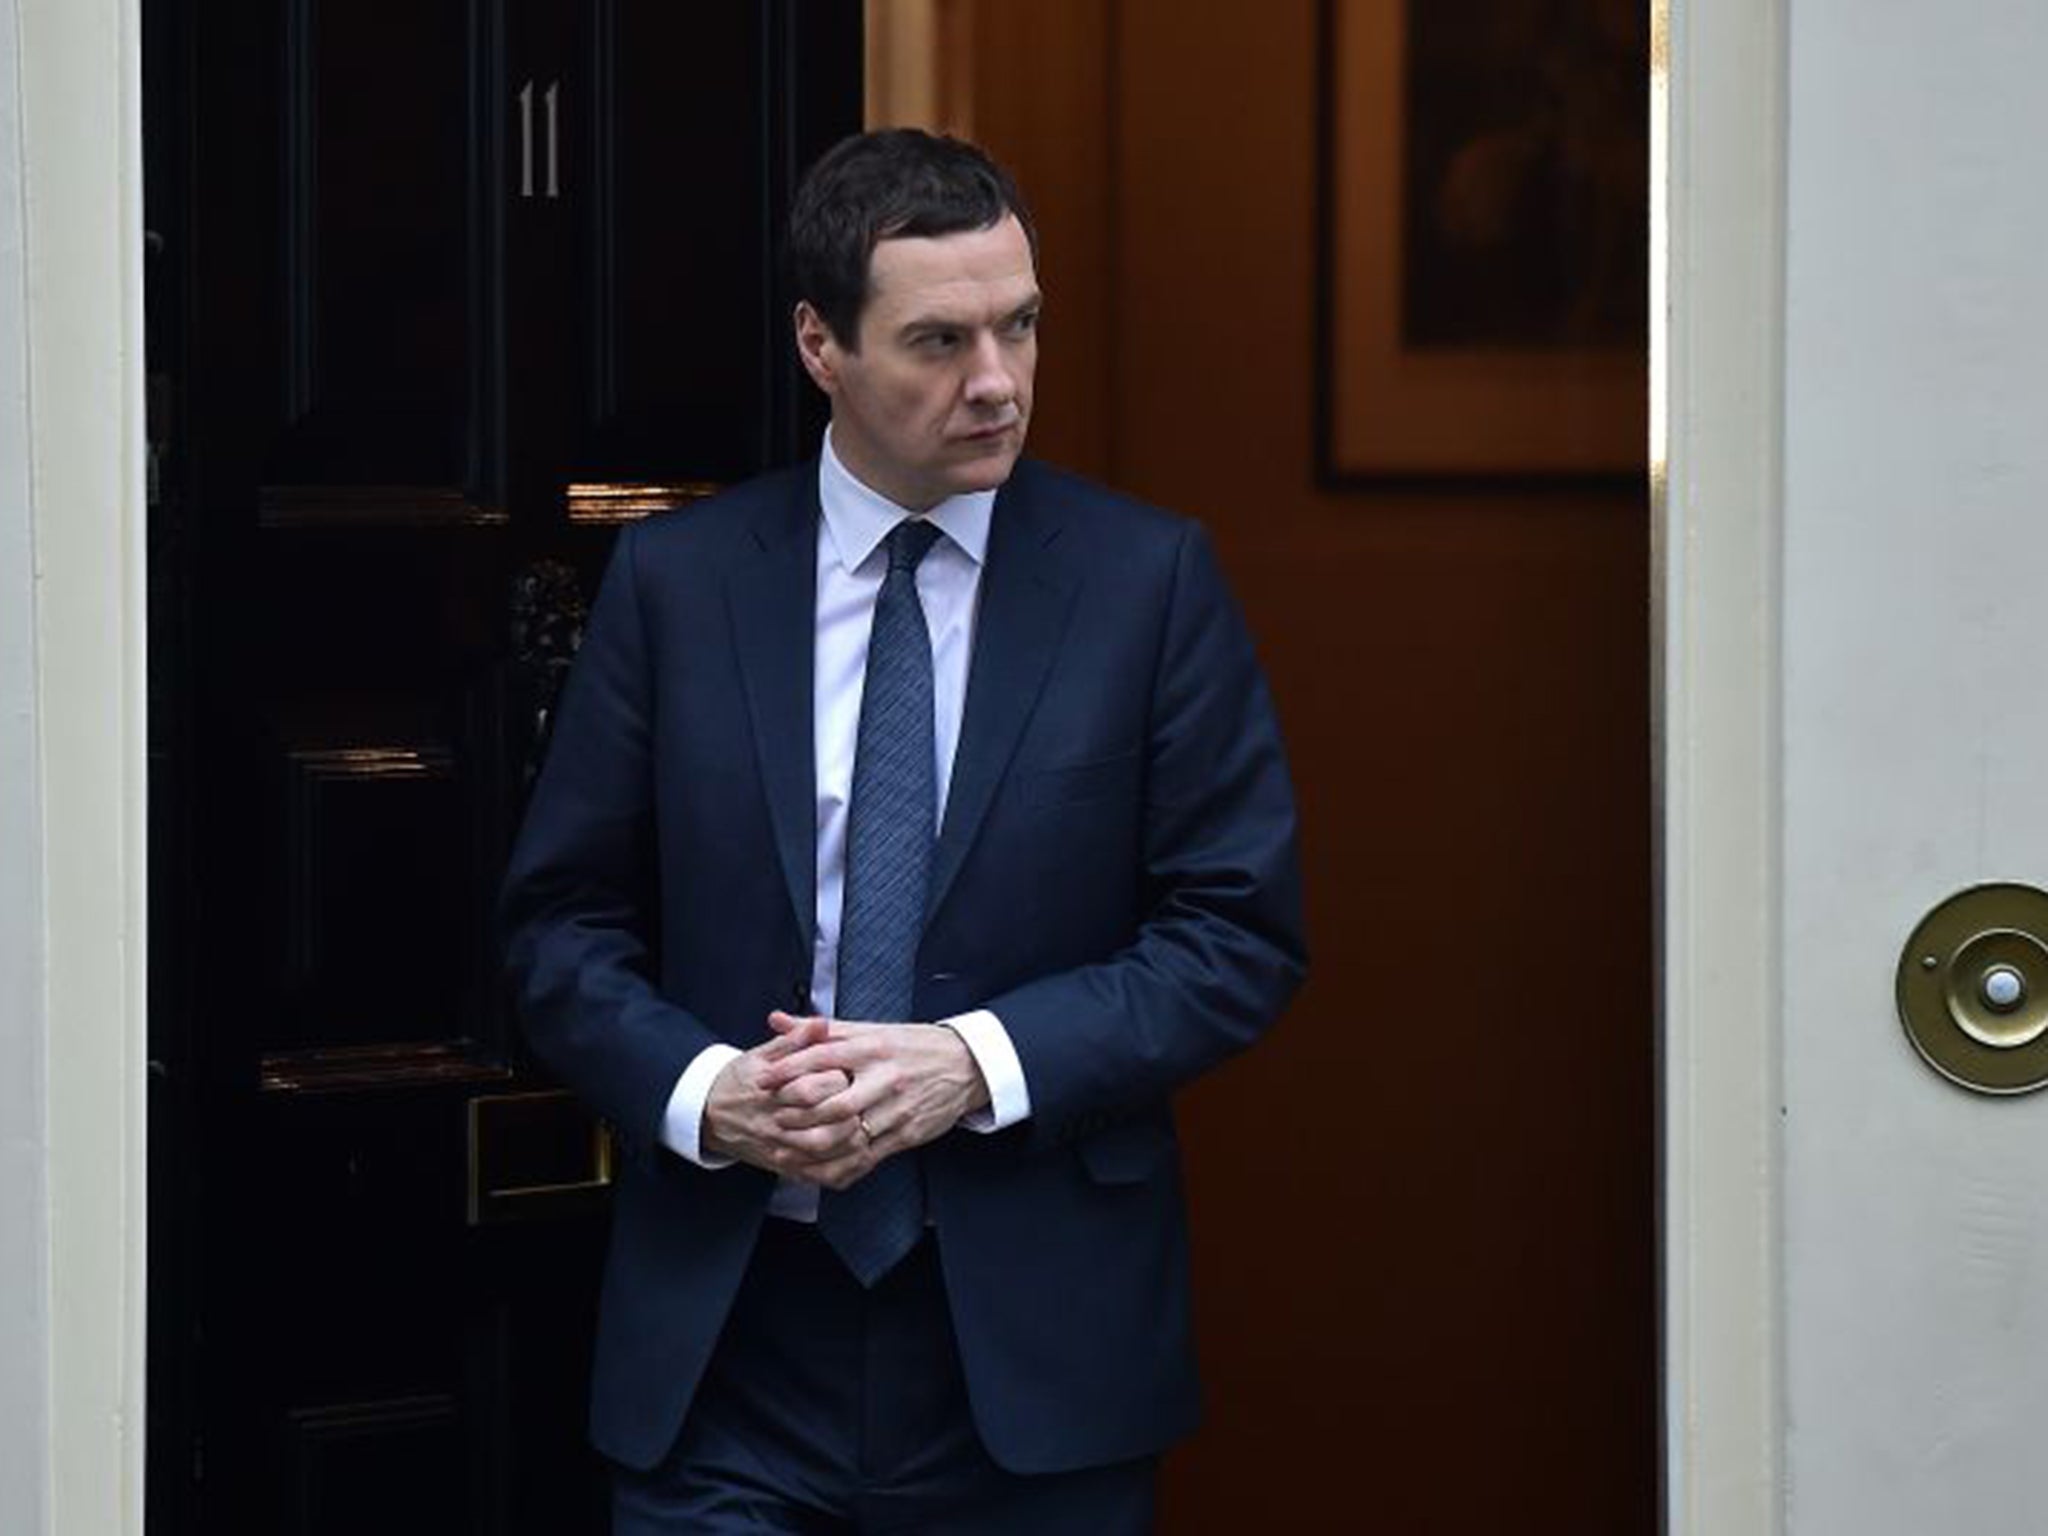 Details have started to emerge of the Budget Osborne will present on Wednesday